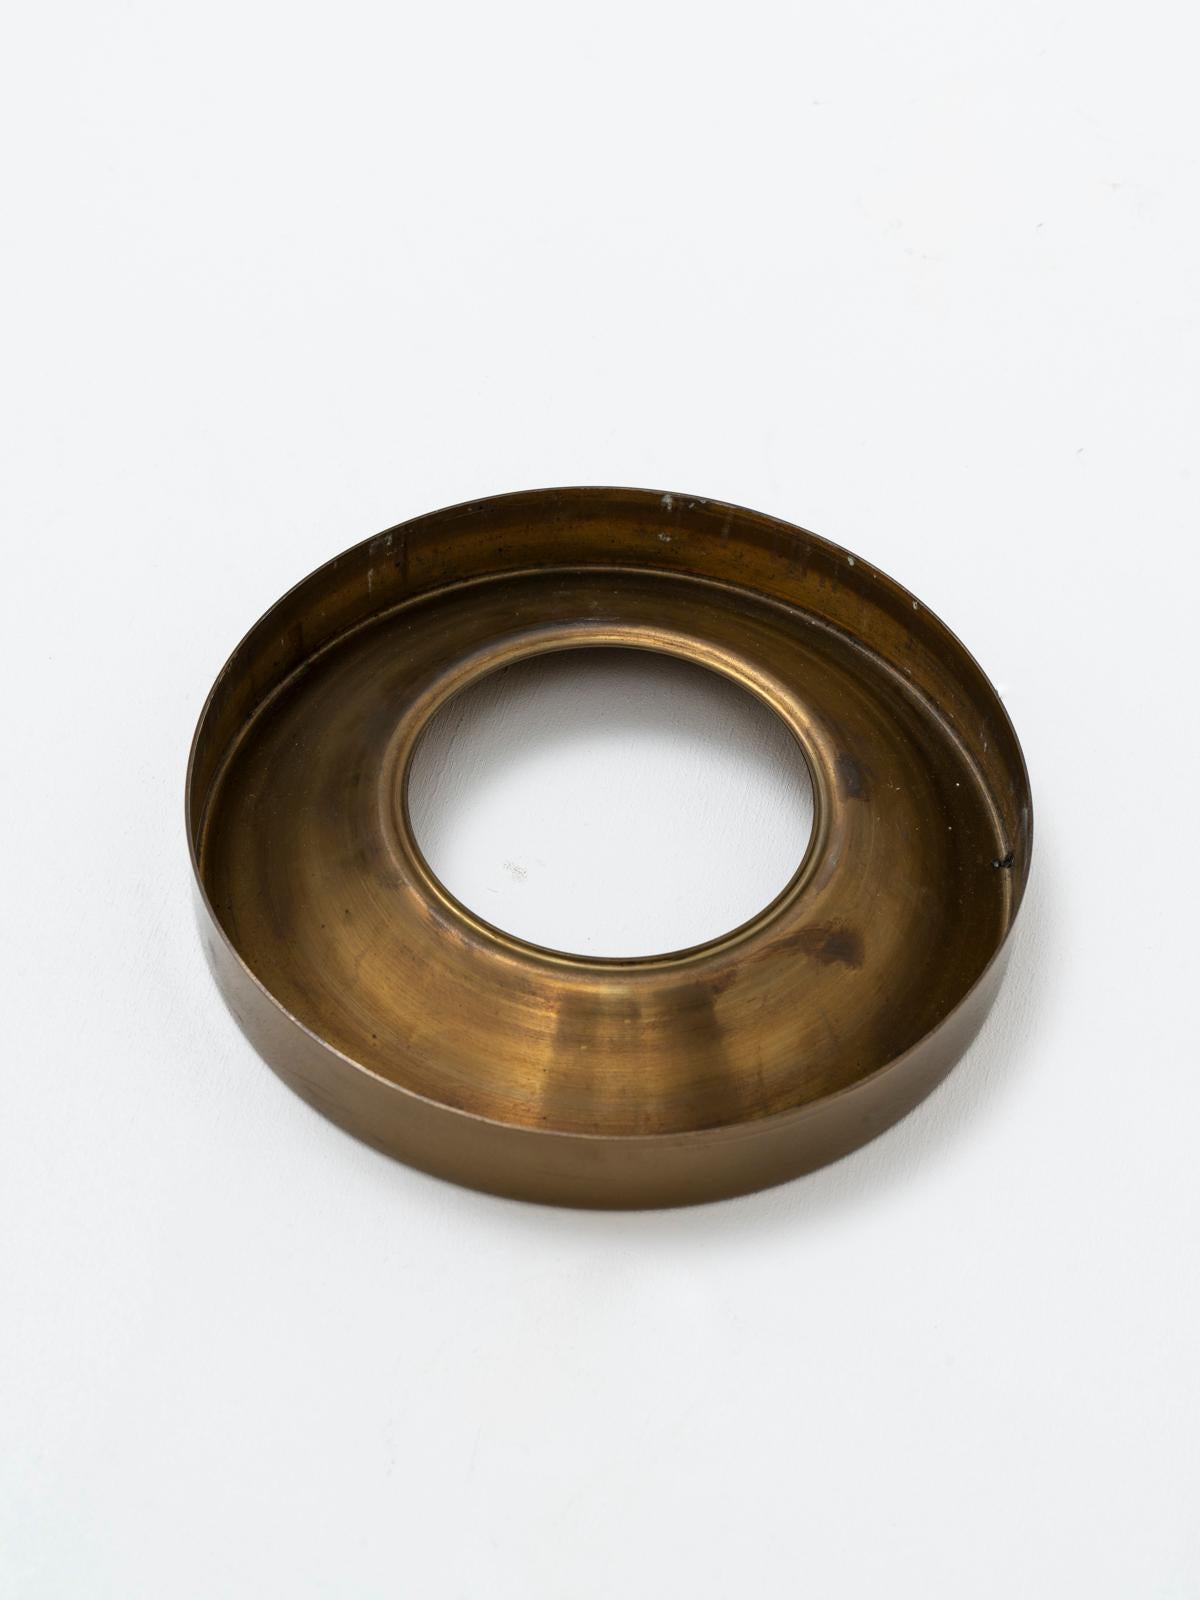 Luigi Caccia Dominioni Round Brass Midcentury Picture Holder for Azucena, 1960s In Good Condition For Sale In Milan, Italy